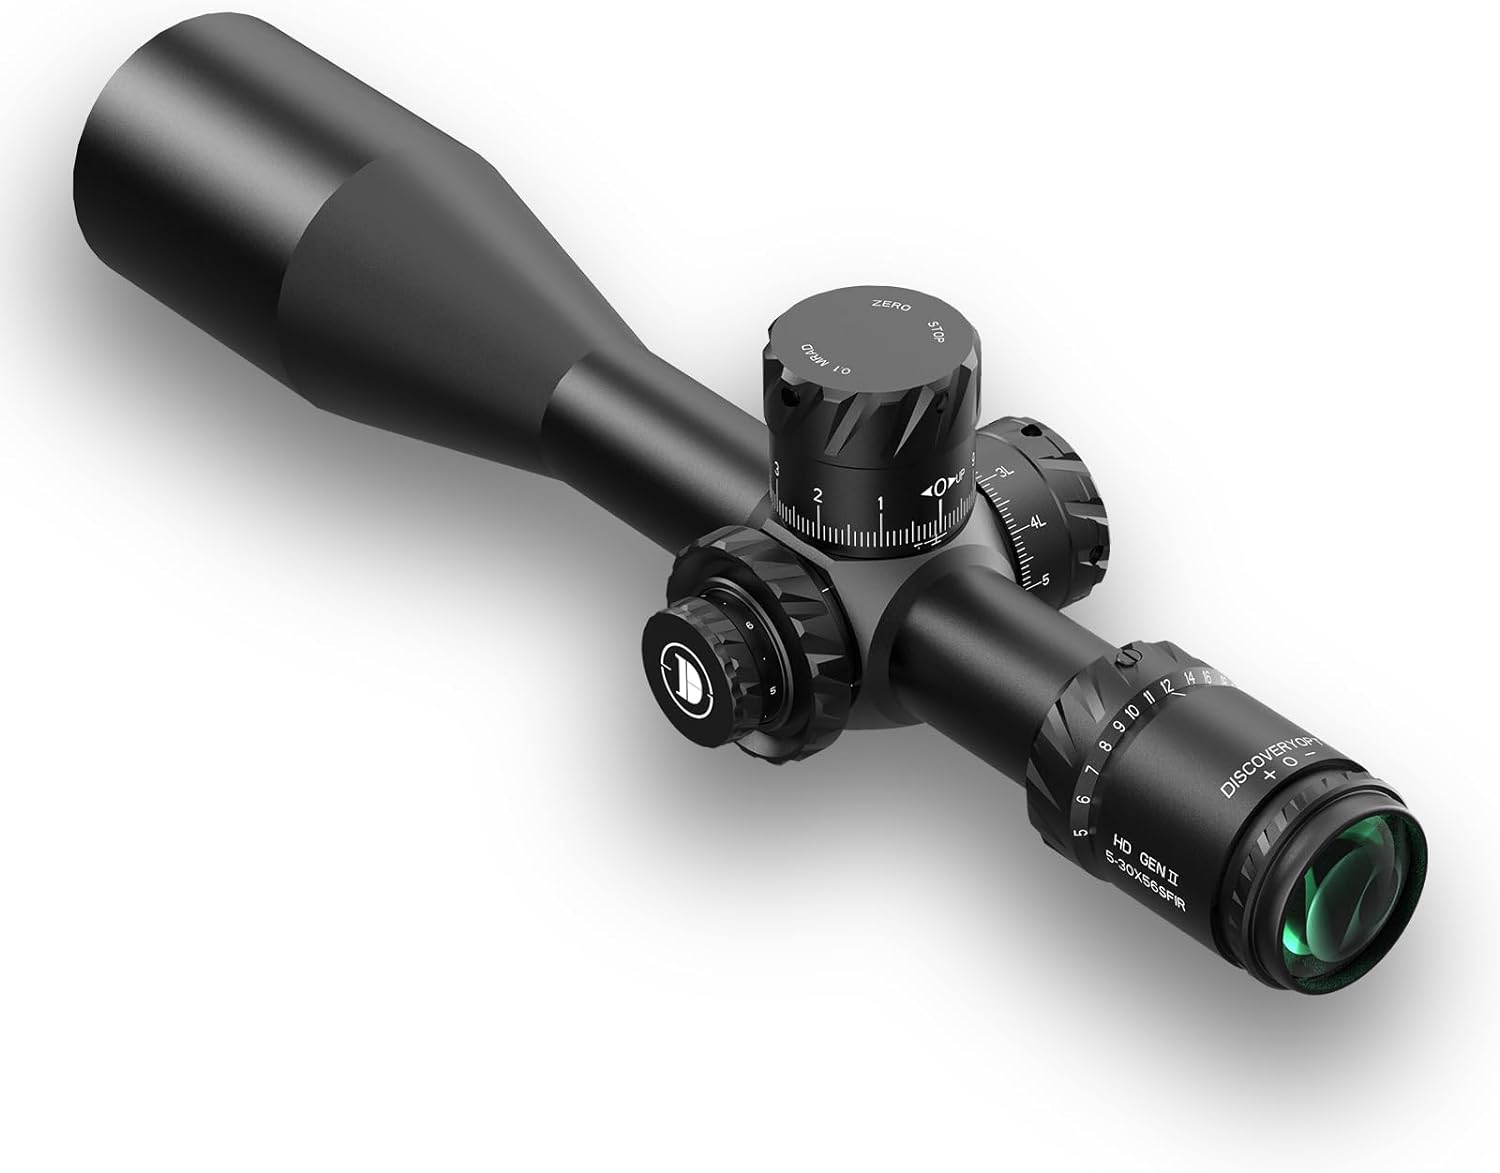 DISCOVERYOPT HD GEN-II 5-30x56 Rifle Optics, First Focal Plane, FFP Rifle Scope with Red Illuminated Reticle, Zero Stop 34mm Tube, Long Range RifleScopes for Hunting and Precision Shooting… - DISCOVERYOPT HD Rifle Scope Review